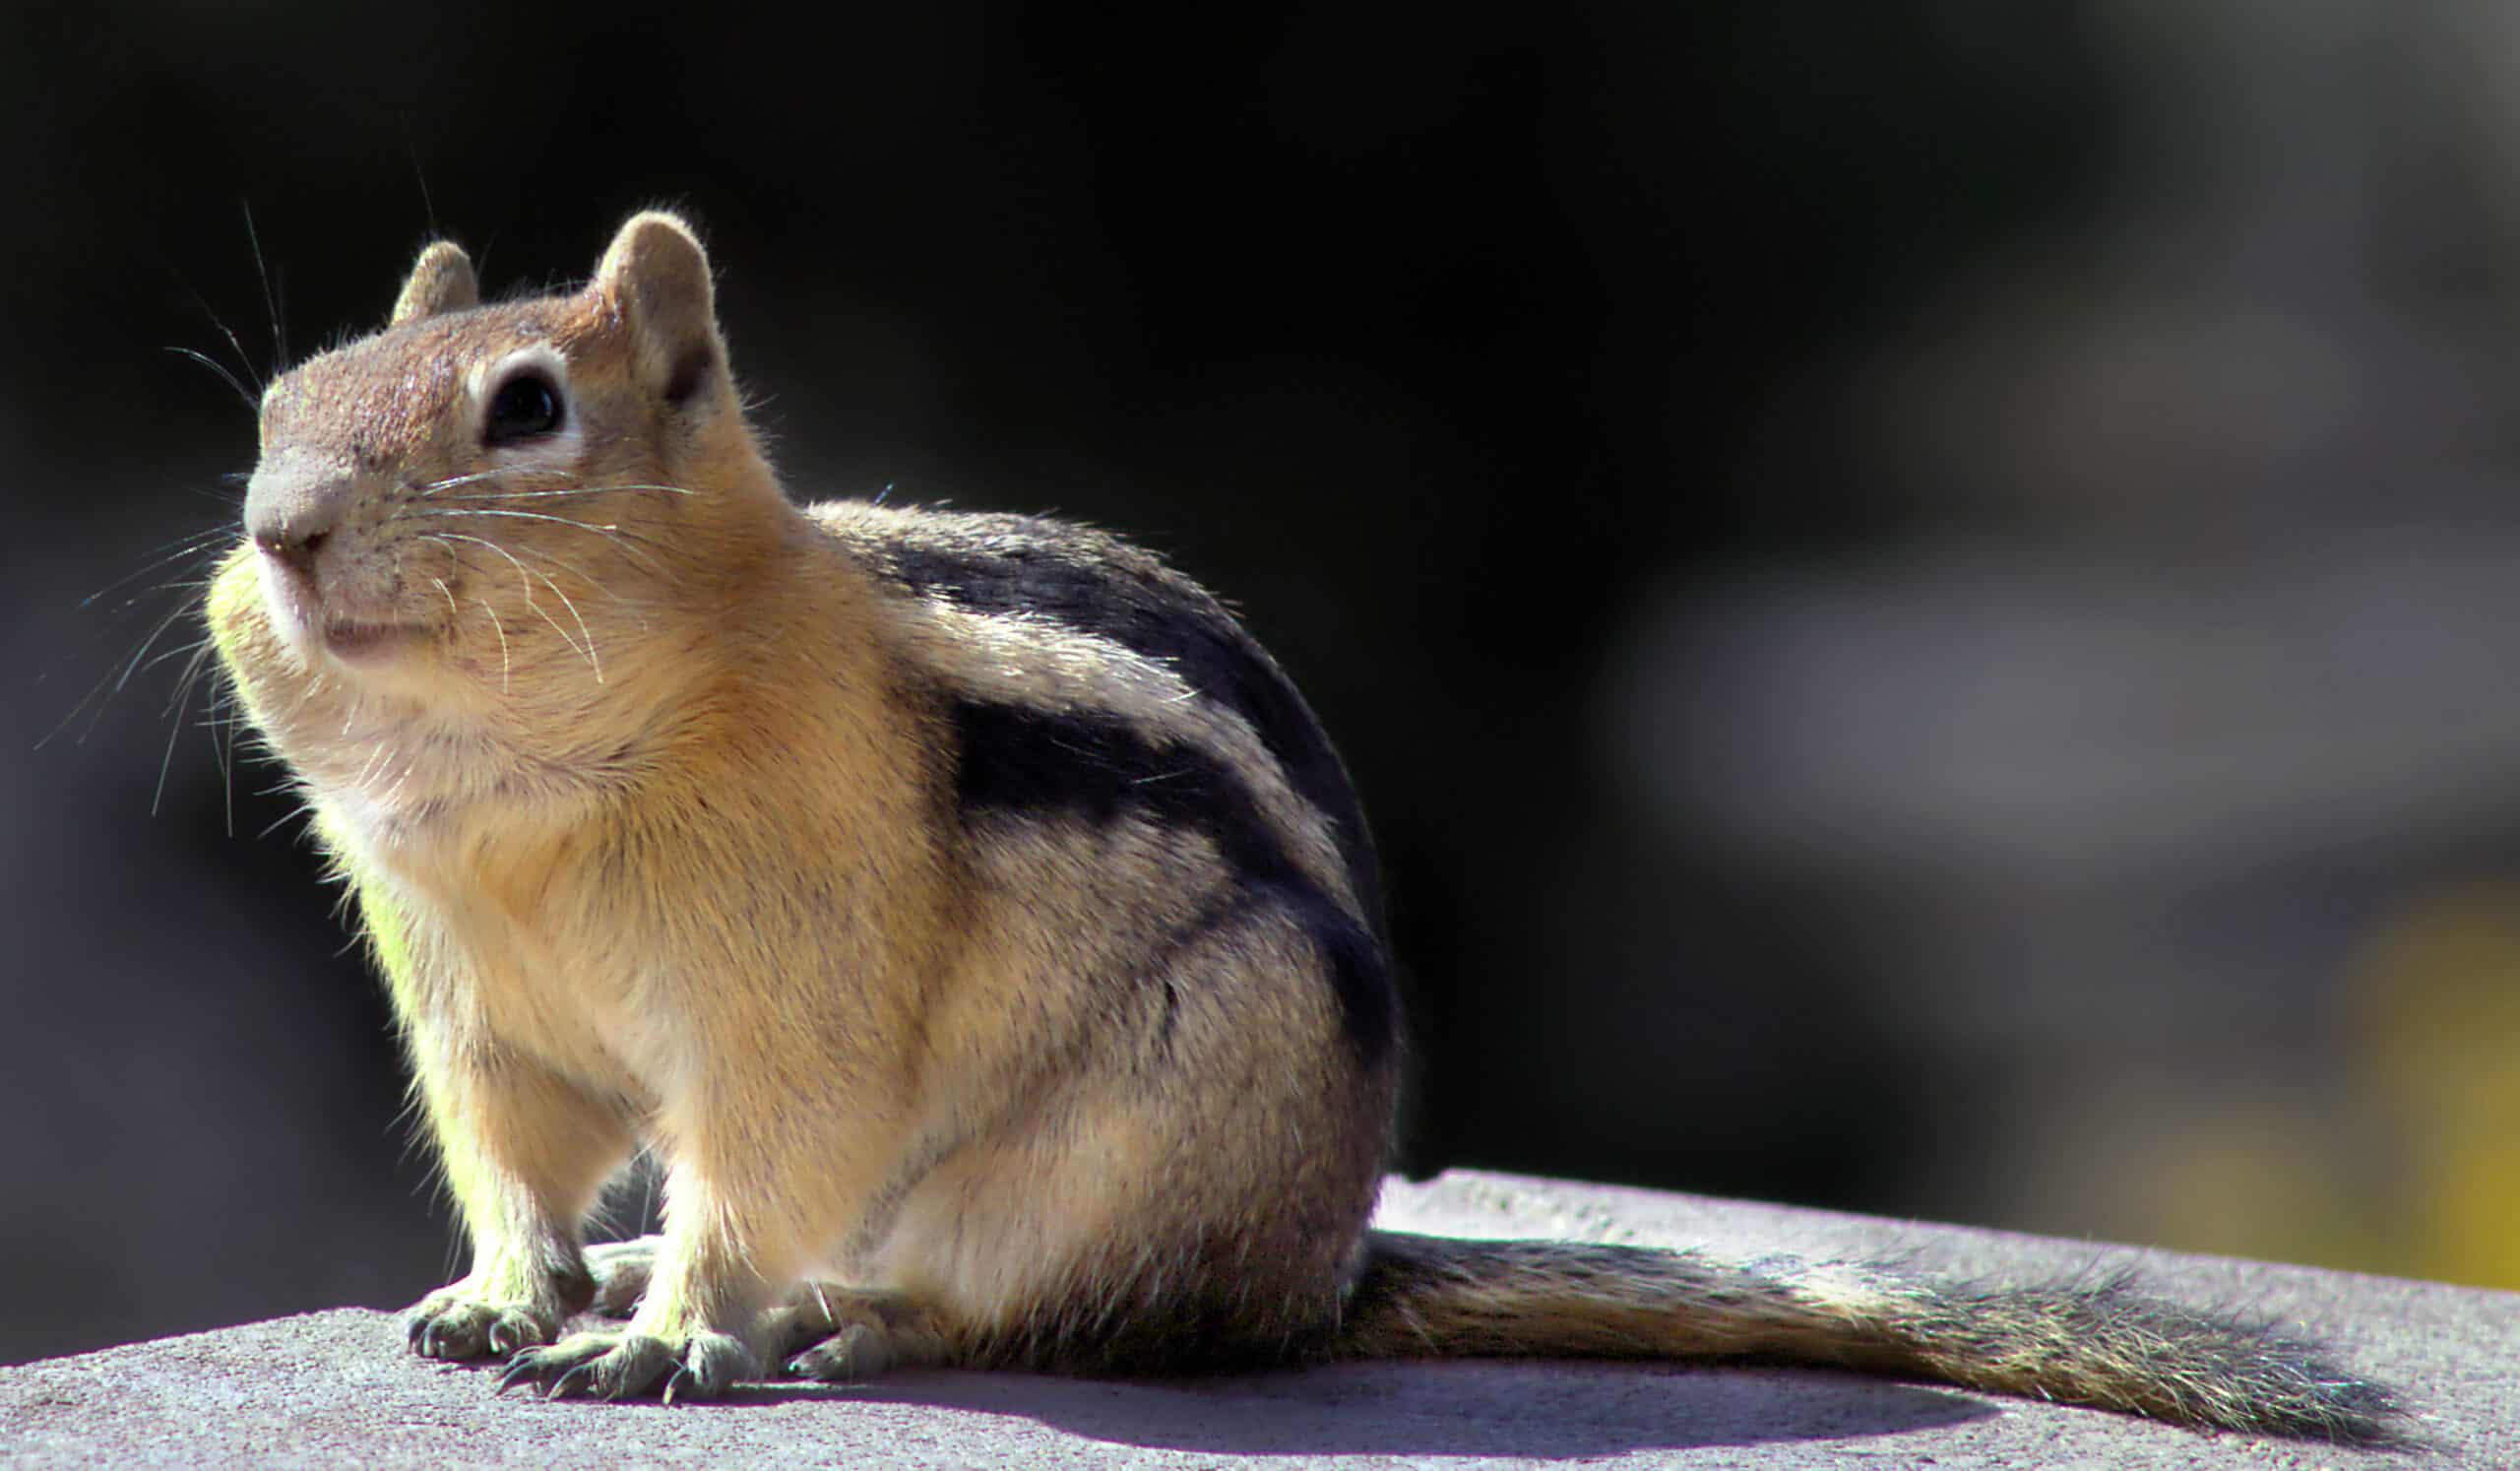 Squirrels in the Rockies are feeling the pitch of warming temperatures